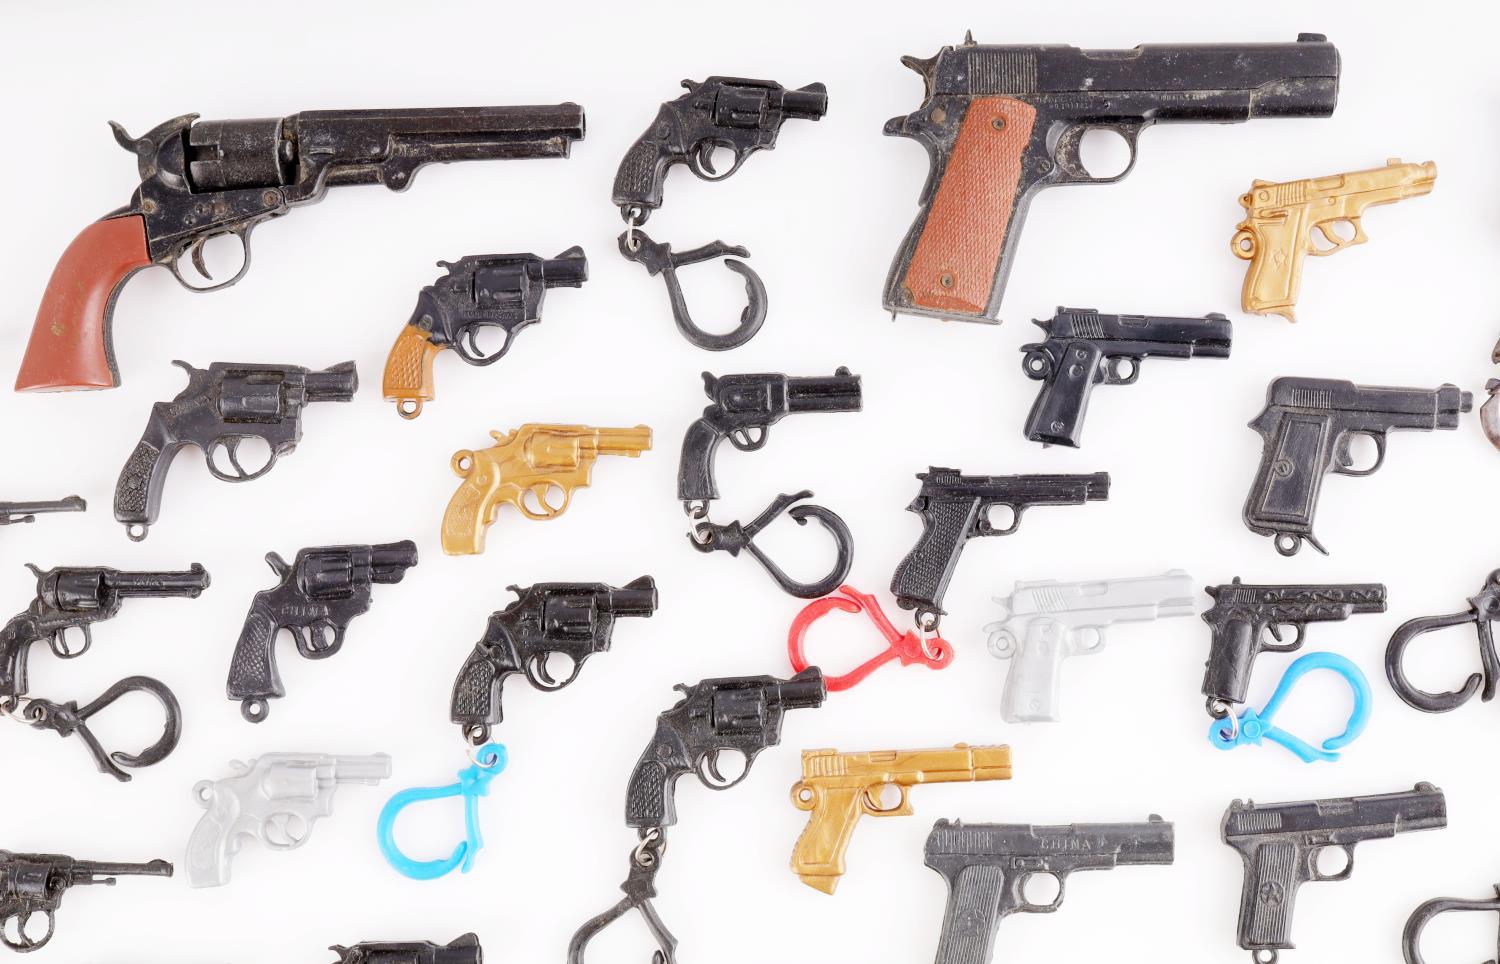 LARGE COLLECTION OF MINIATURE TOY GUN LOT